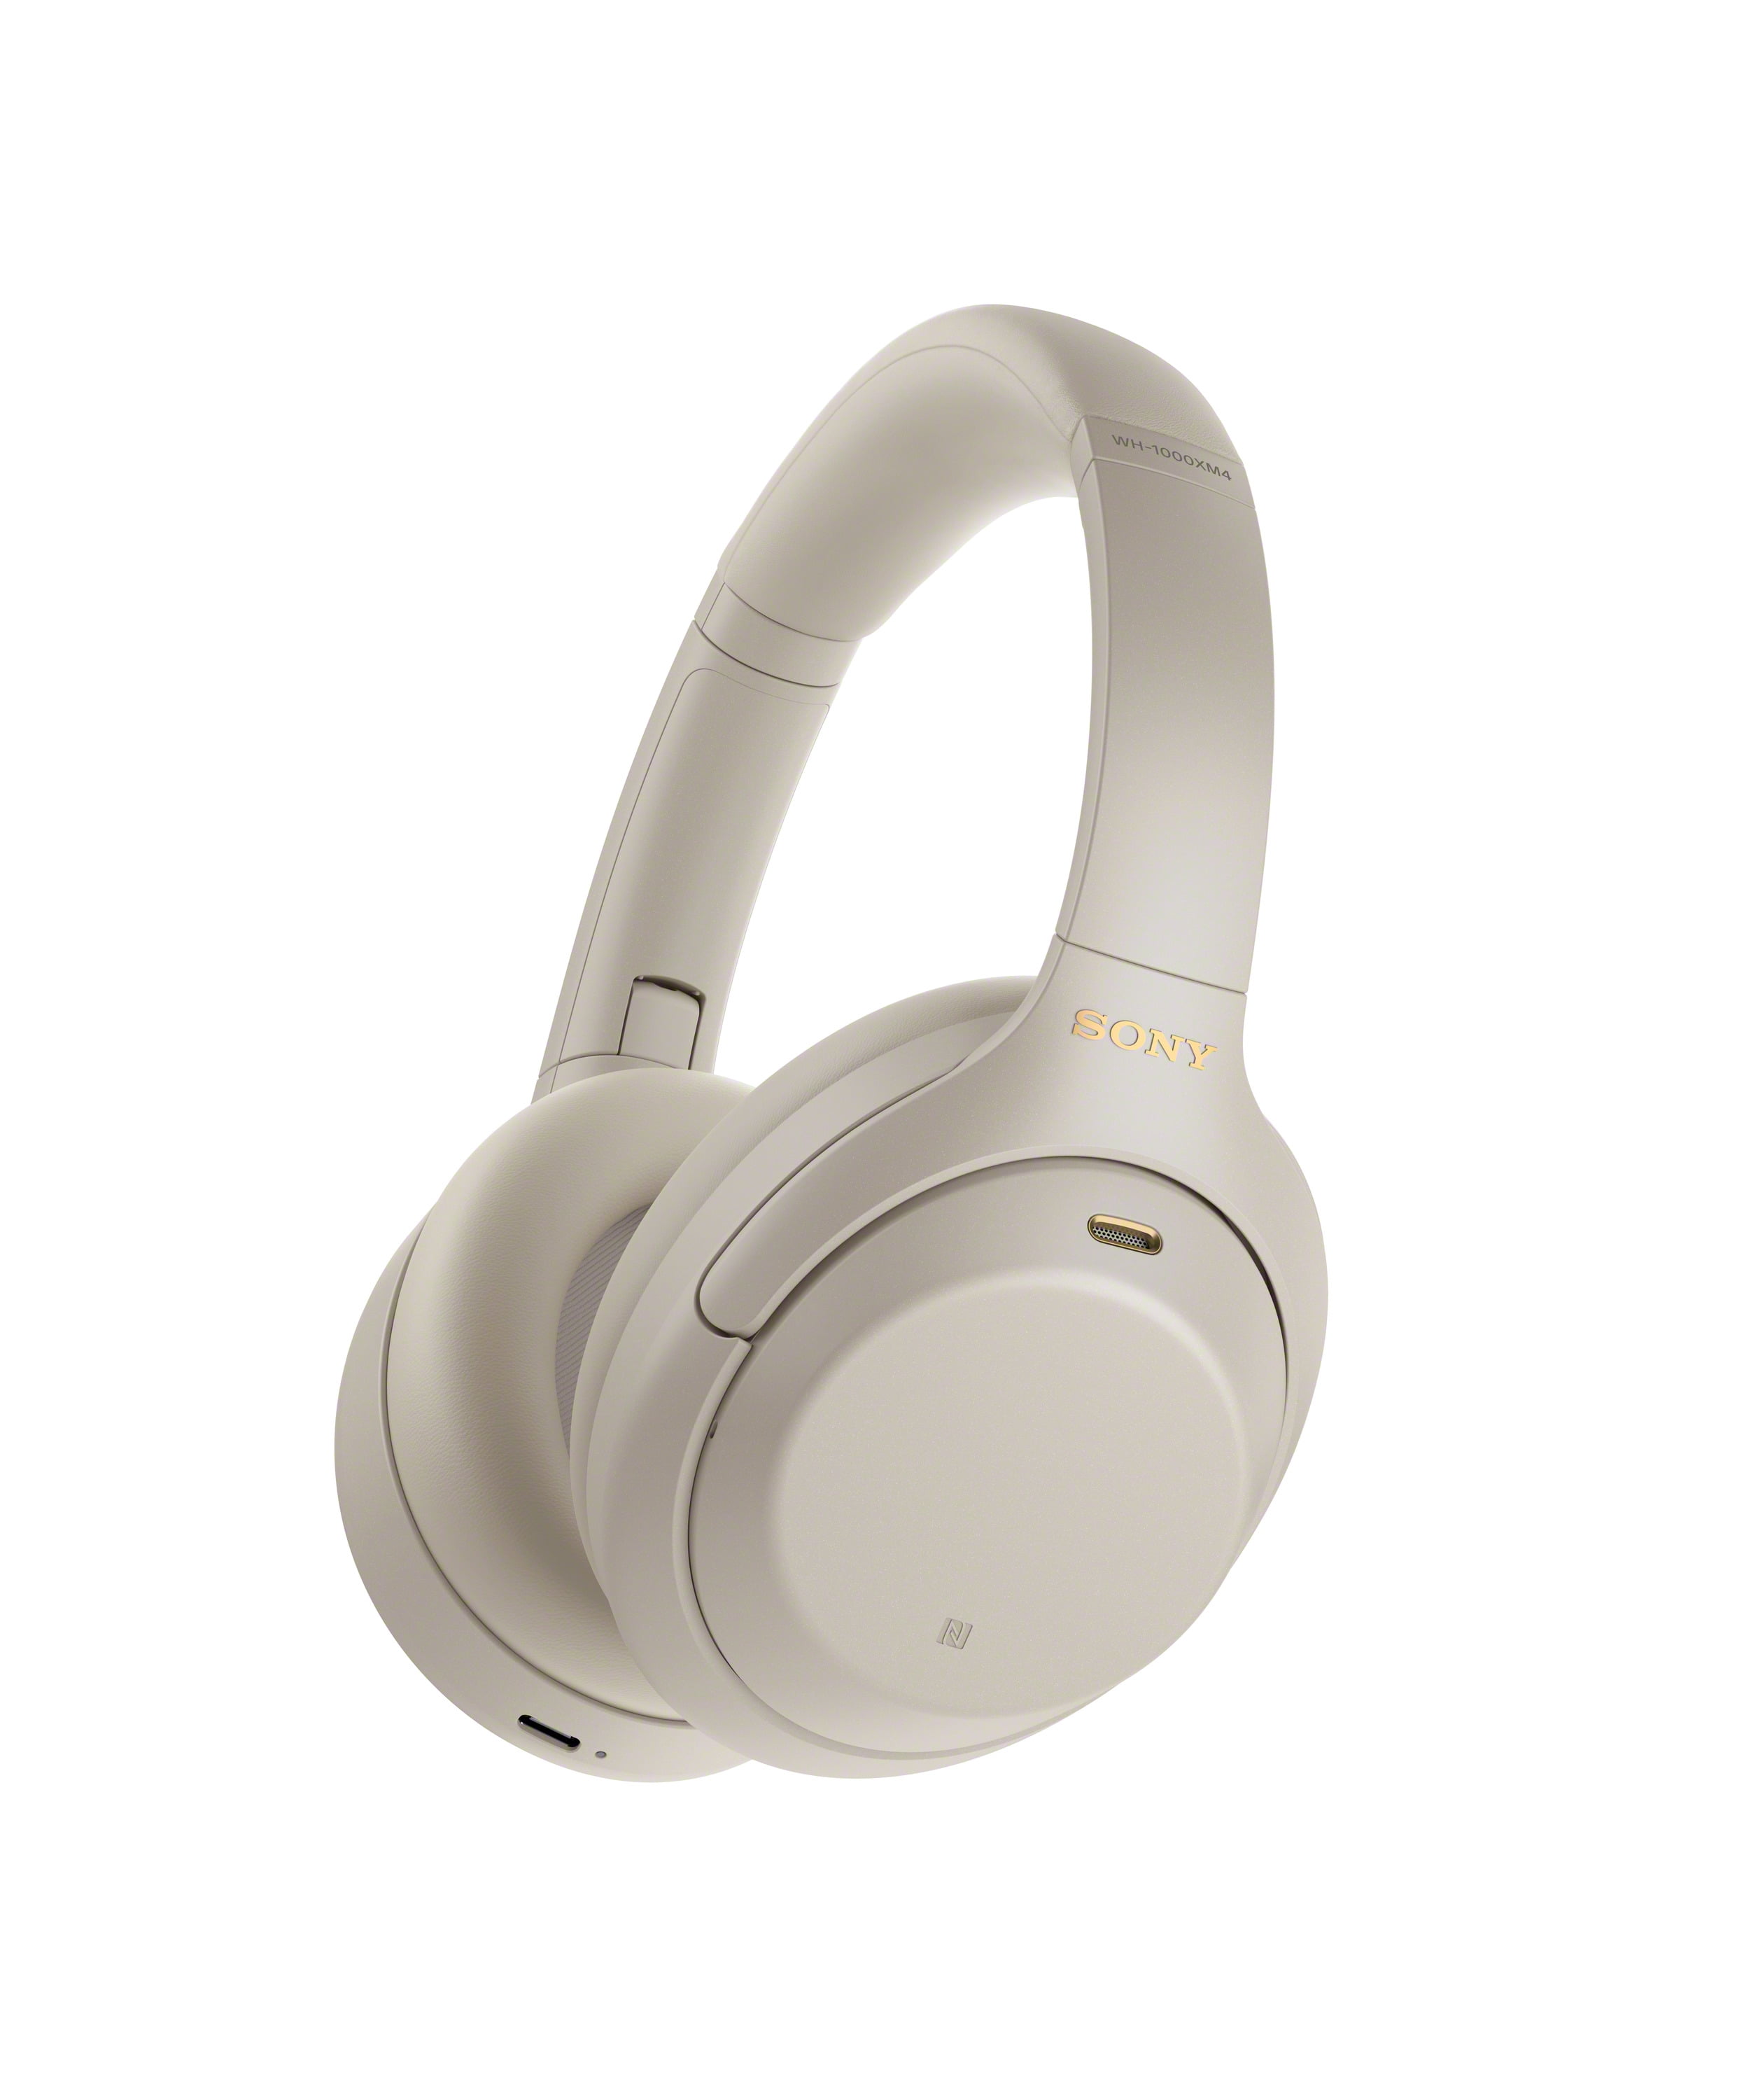 Sony WH-1000XM4 Wireless Over the Ear Noise Cancelling Headphones